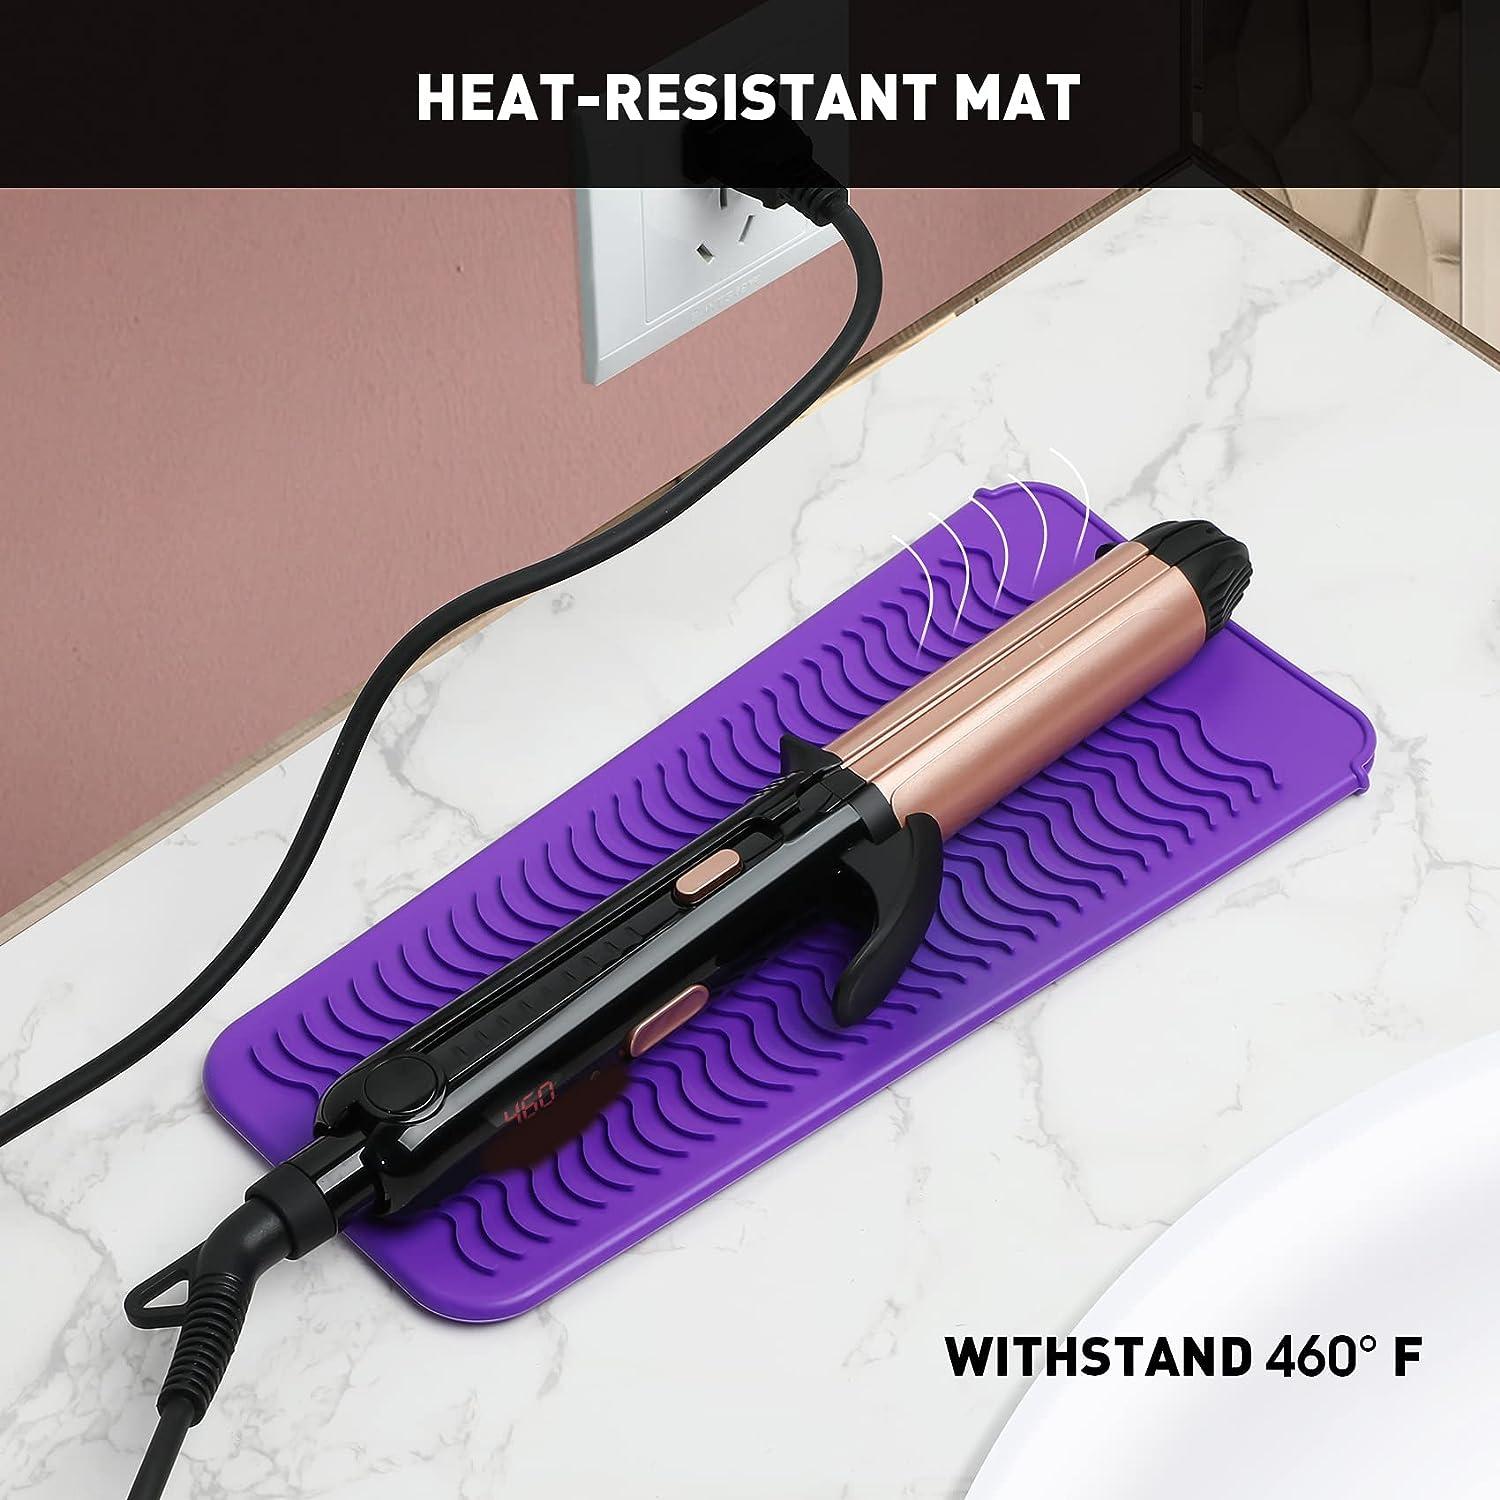 Heat Resistant Silicone Mat Pouch, Mat Cover for Curling Irons, Hair  Straightener, Flat Irons, and Other Hot Hair Tools, Food Grade Silicone 